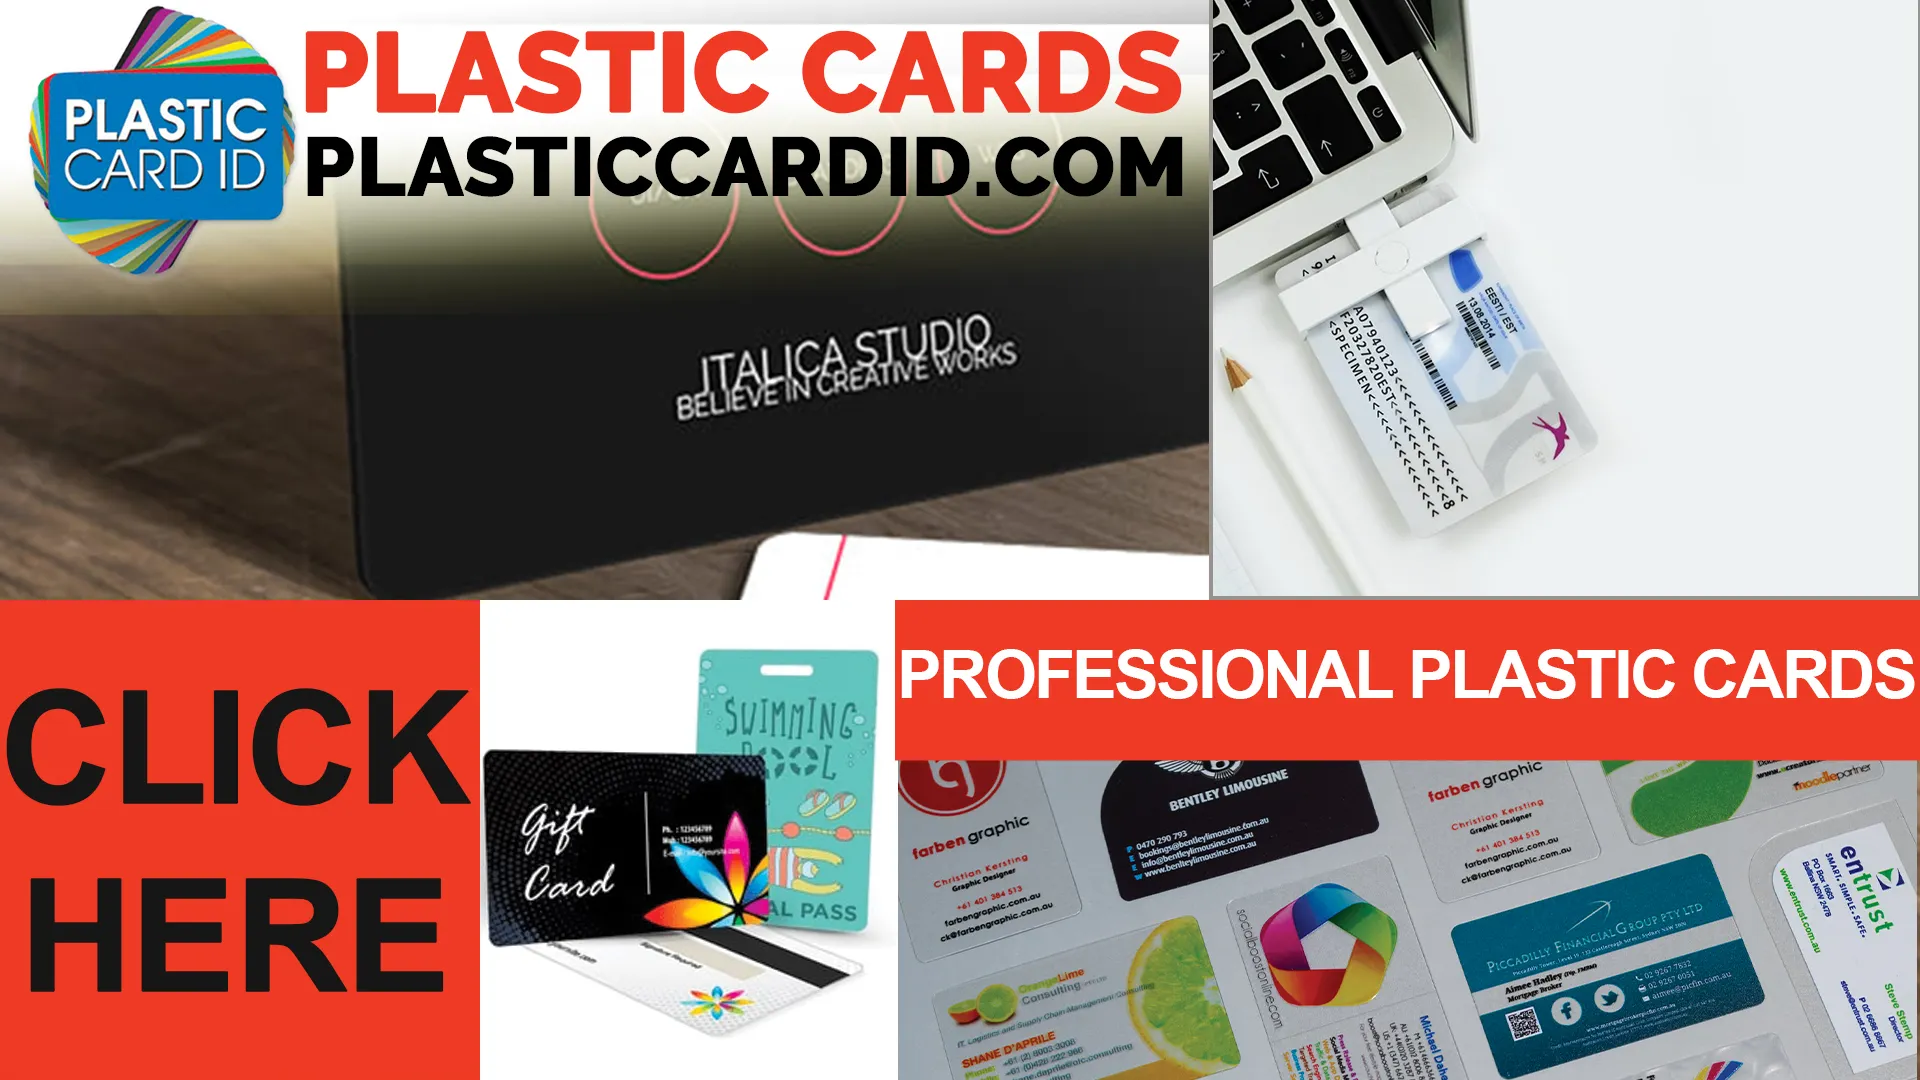 Designing an Effective Branded Plastic Card Campaign